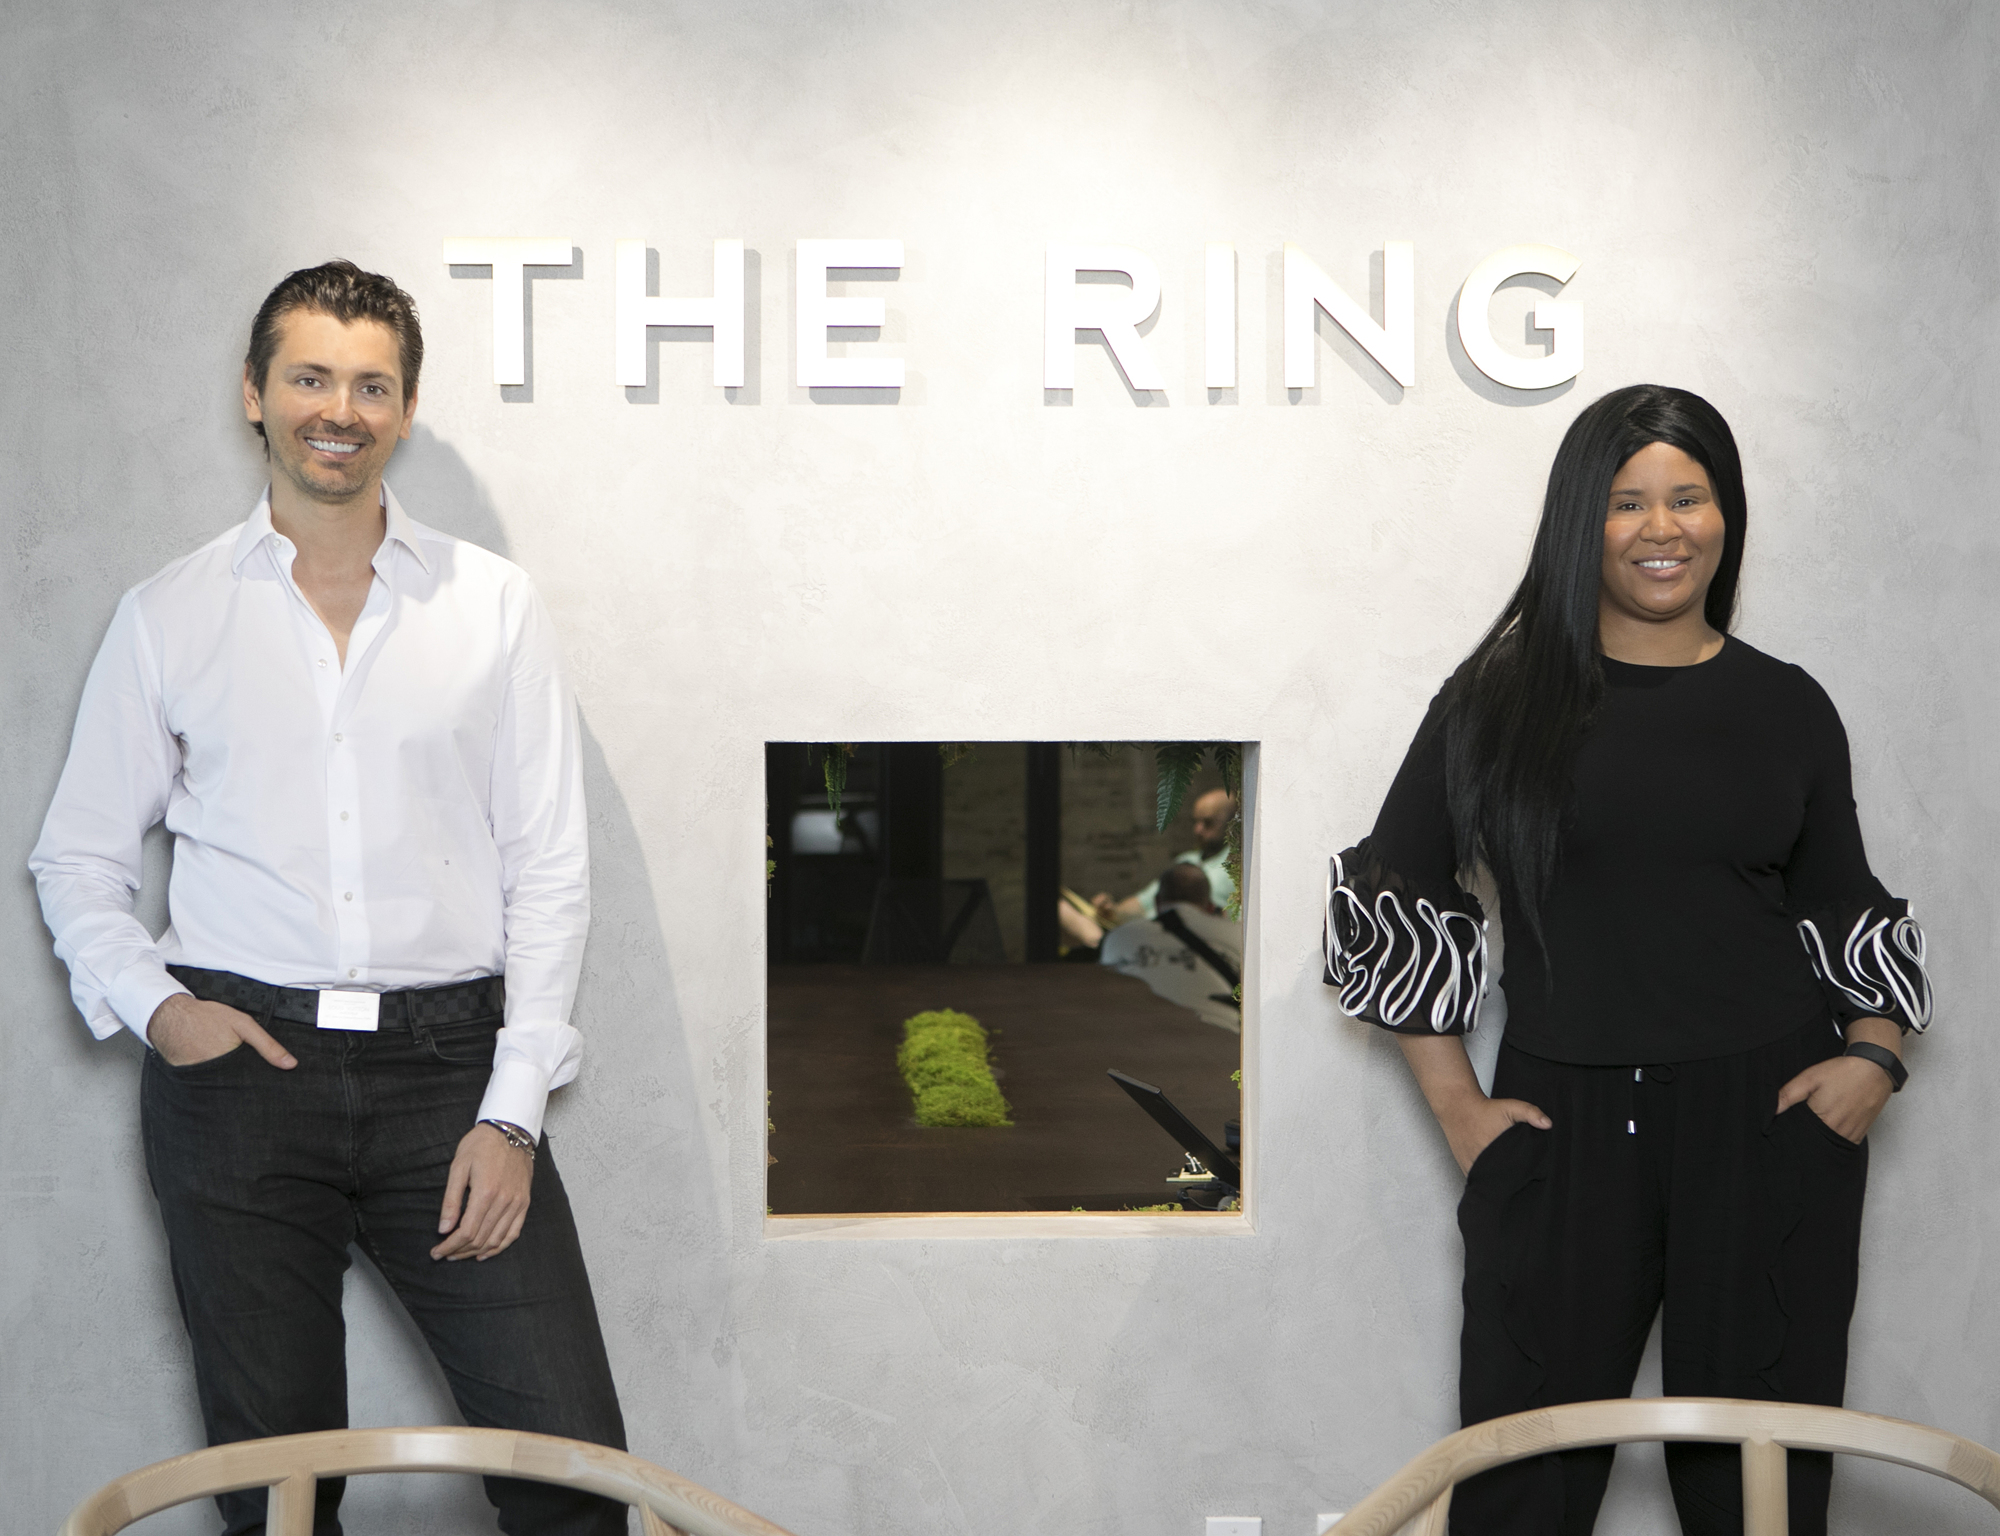 Mark Wemple. Daniels Ikajevs and Janelle Branch opened The Ring in April and already have plans to apply the model to other office properties in the Tampa Bay region.